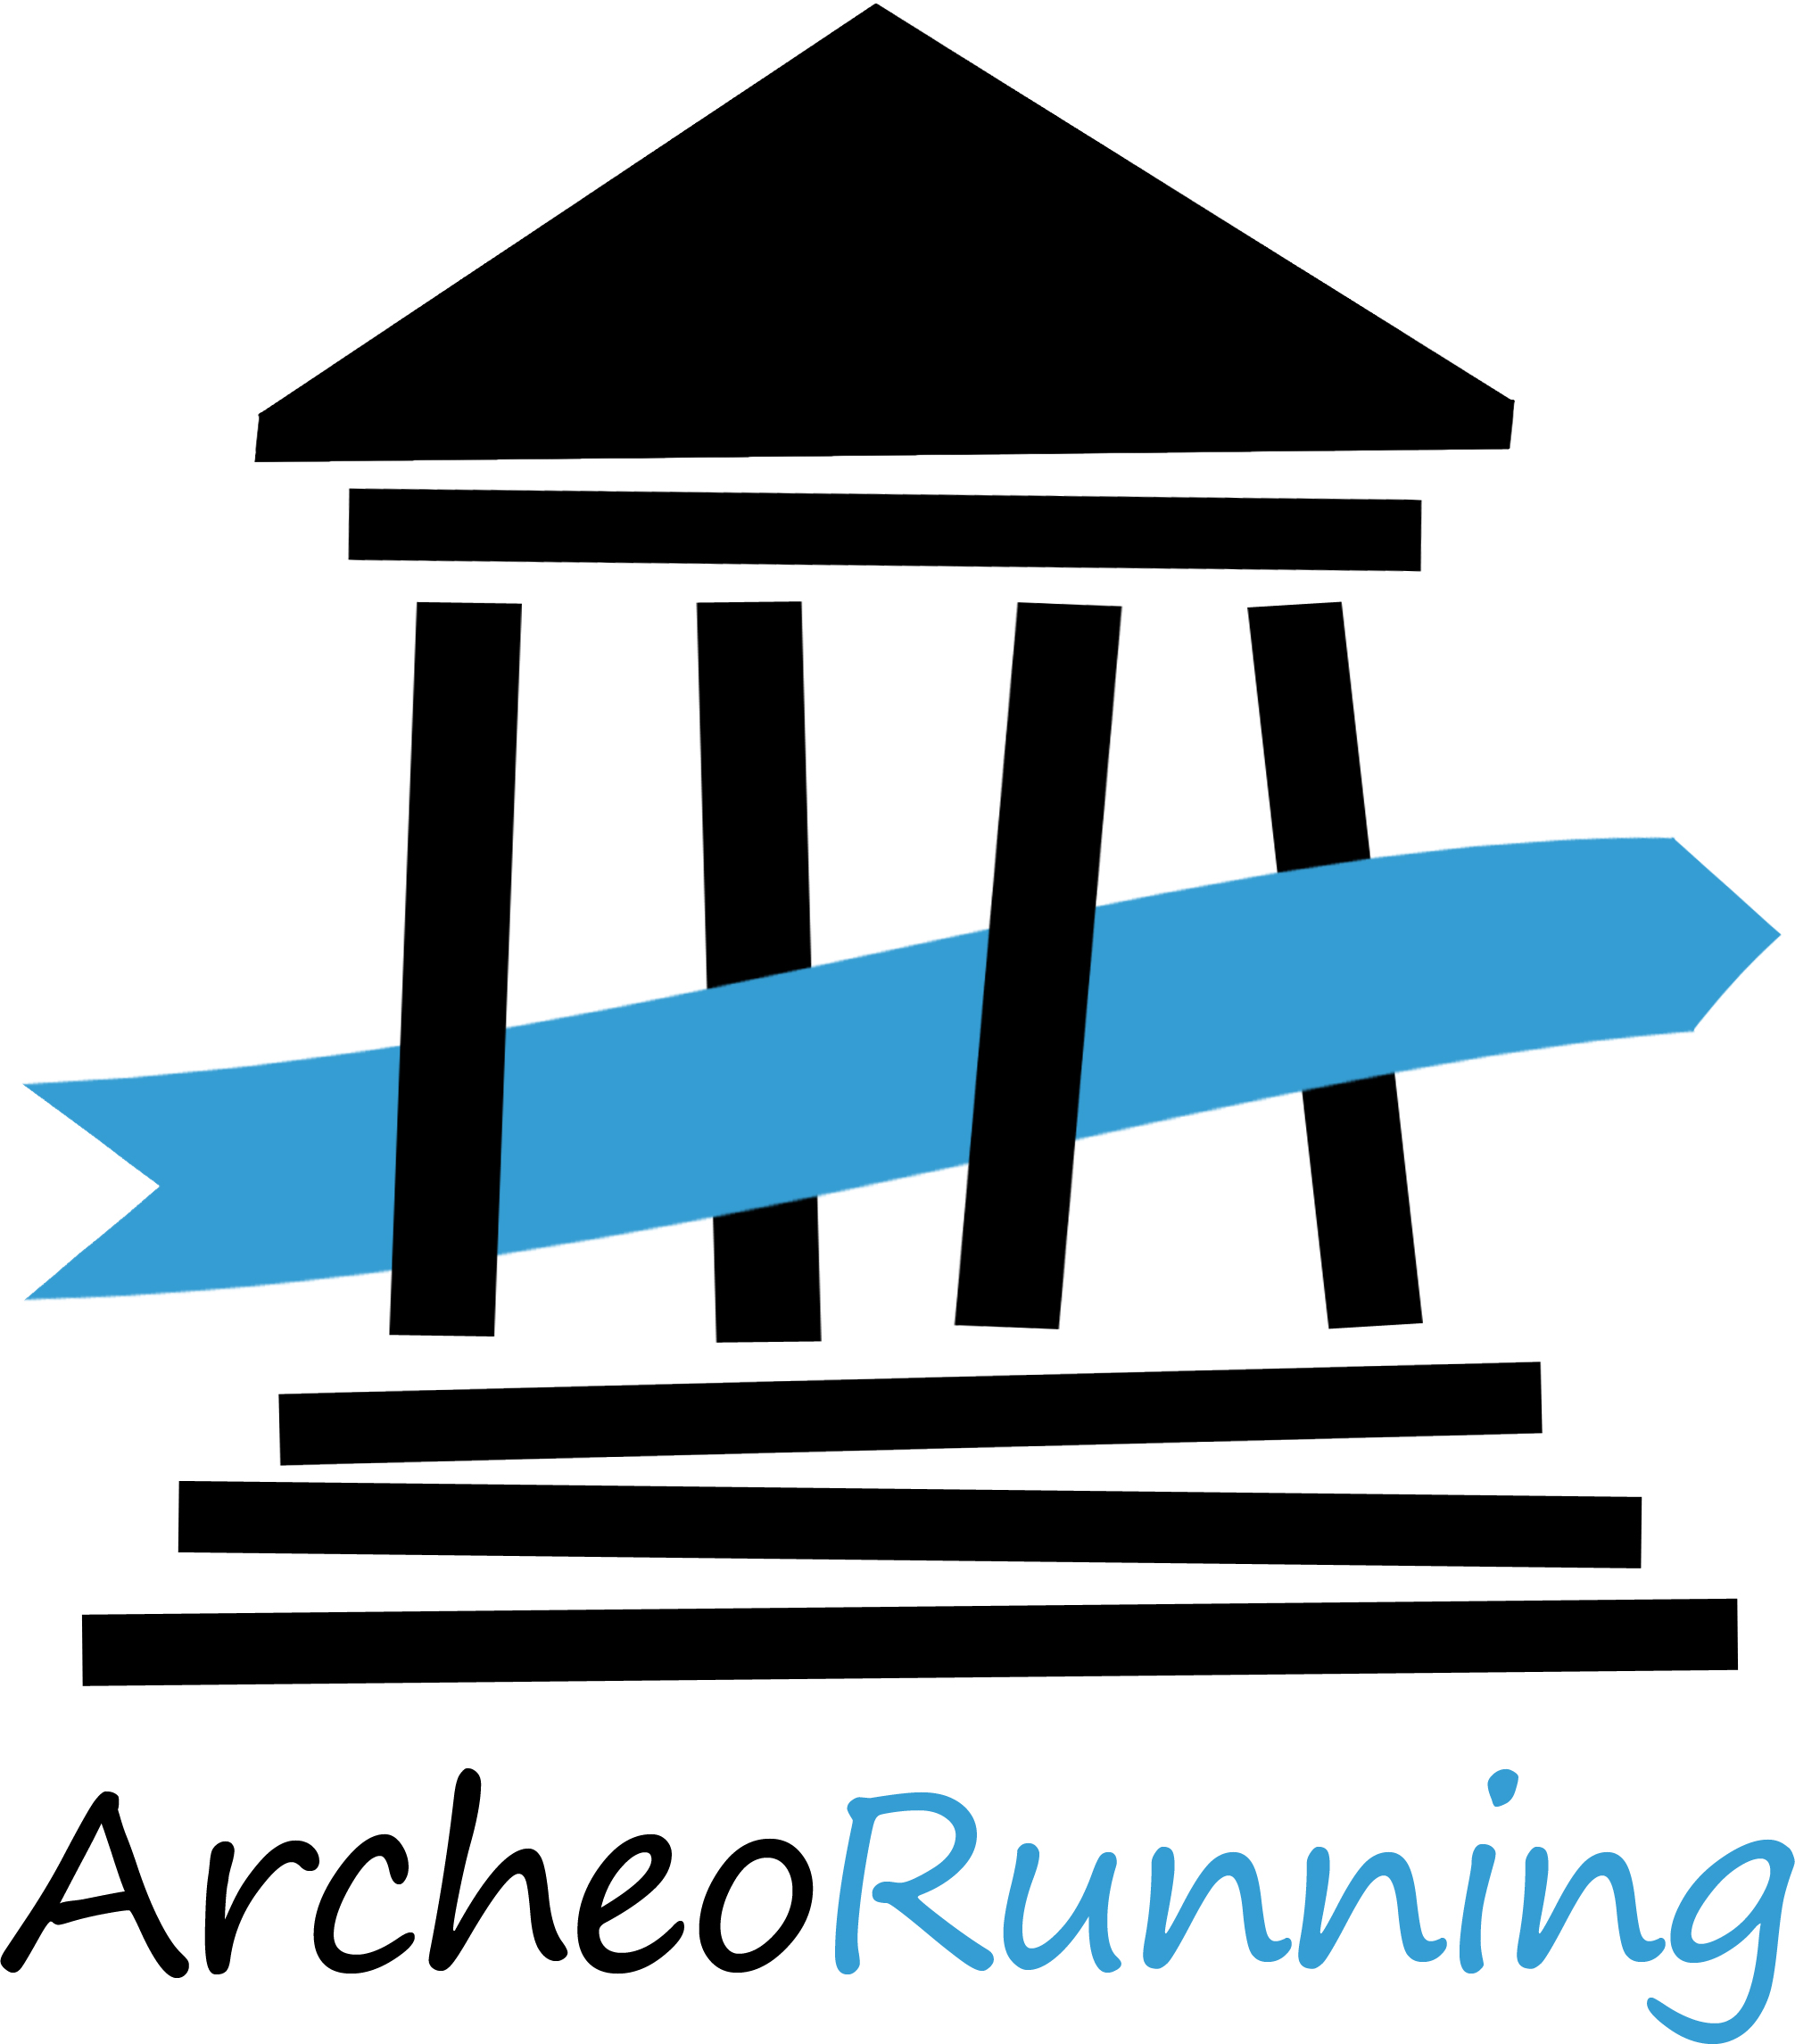 THE ANCIENT ROME RUNNING TOUR